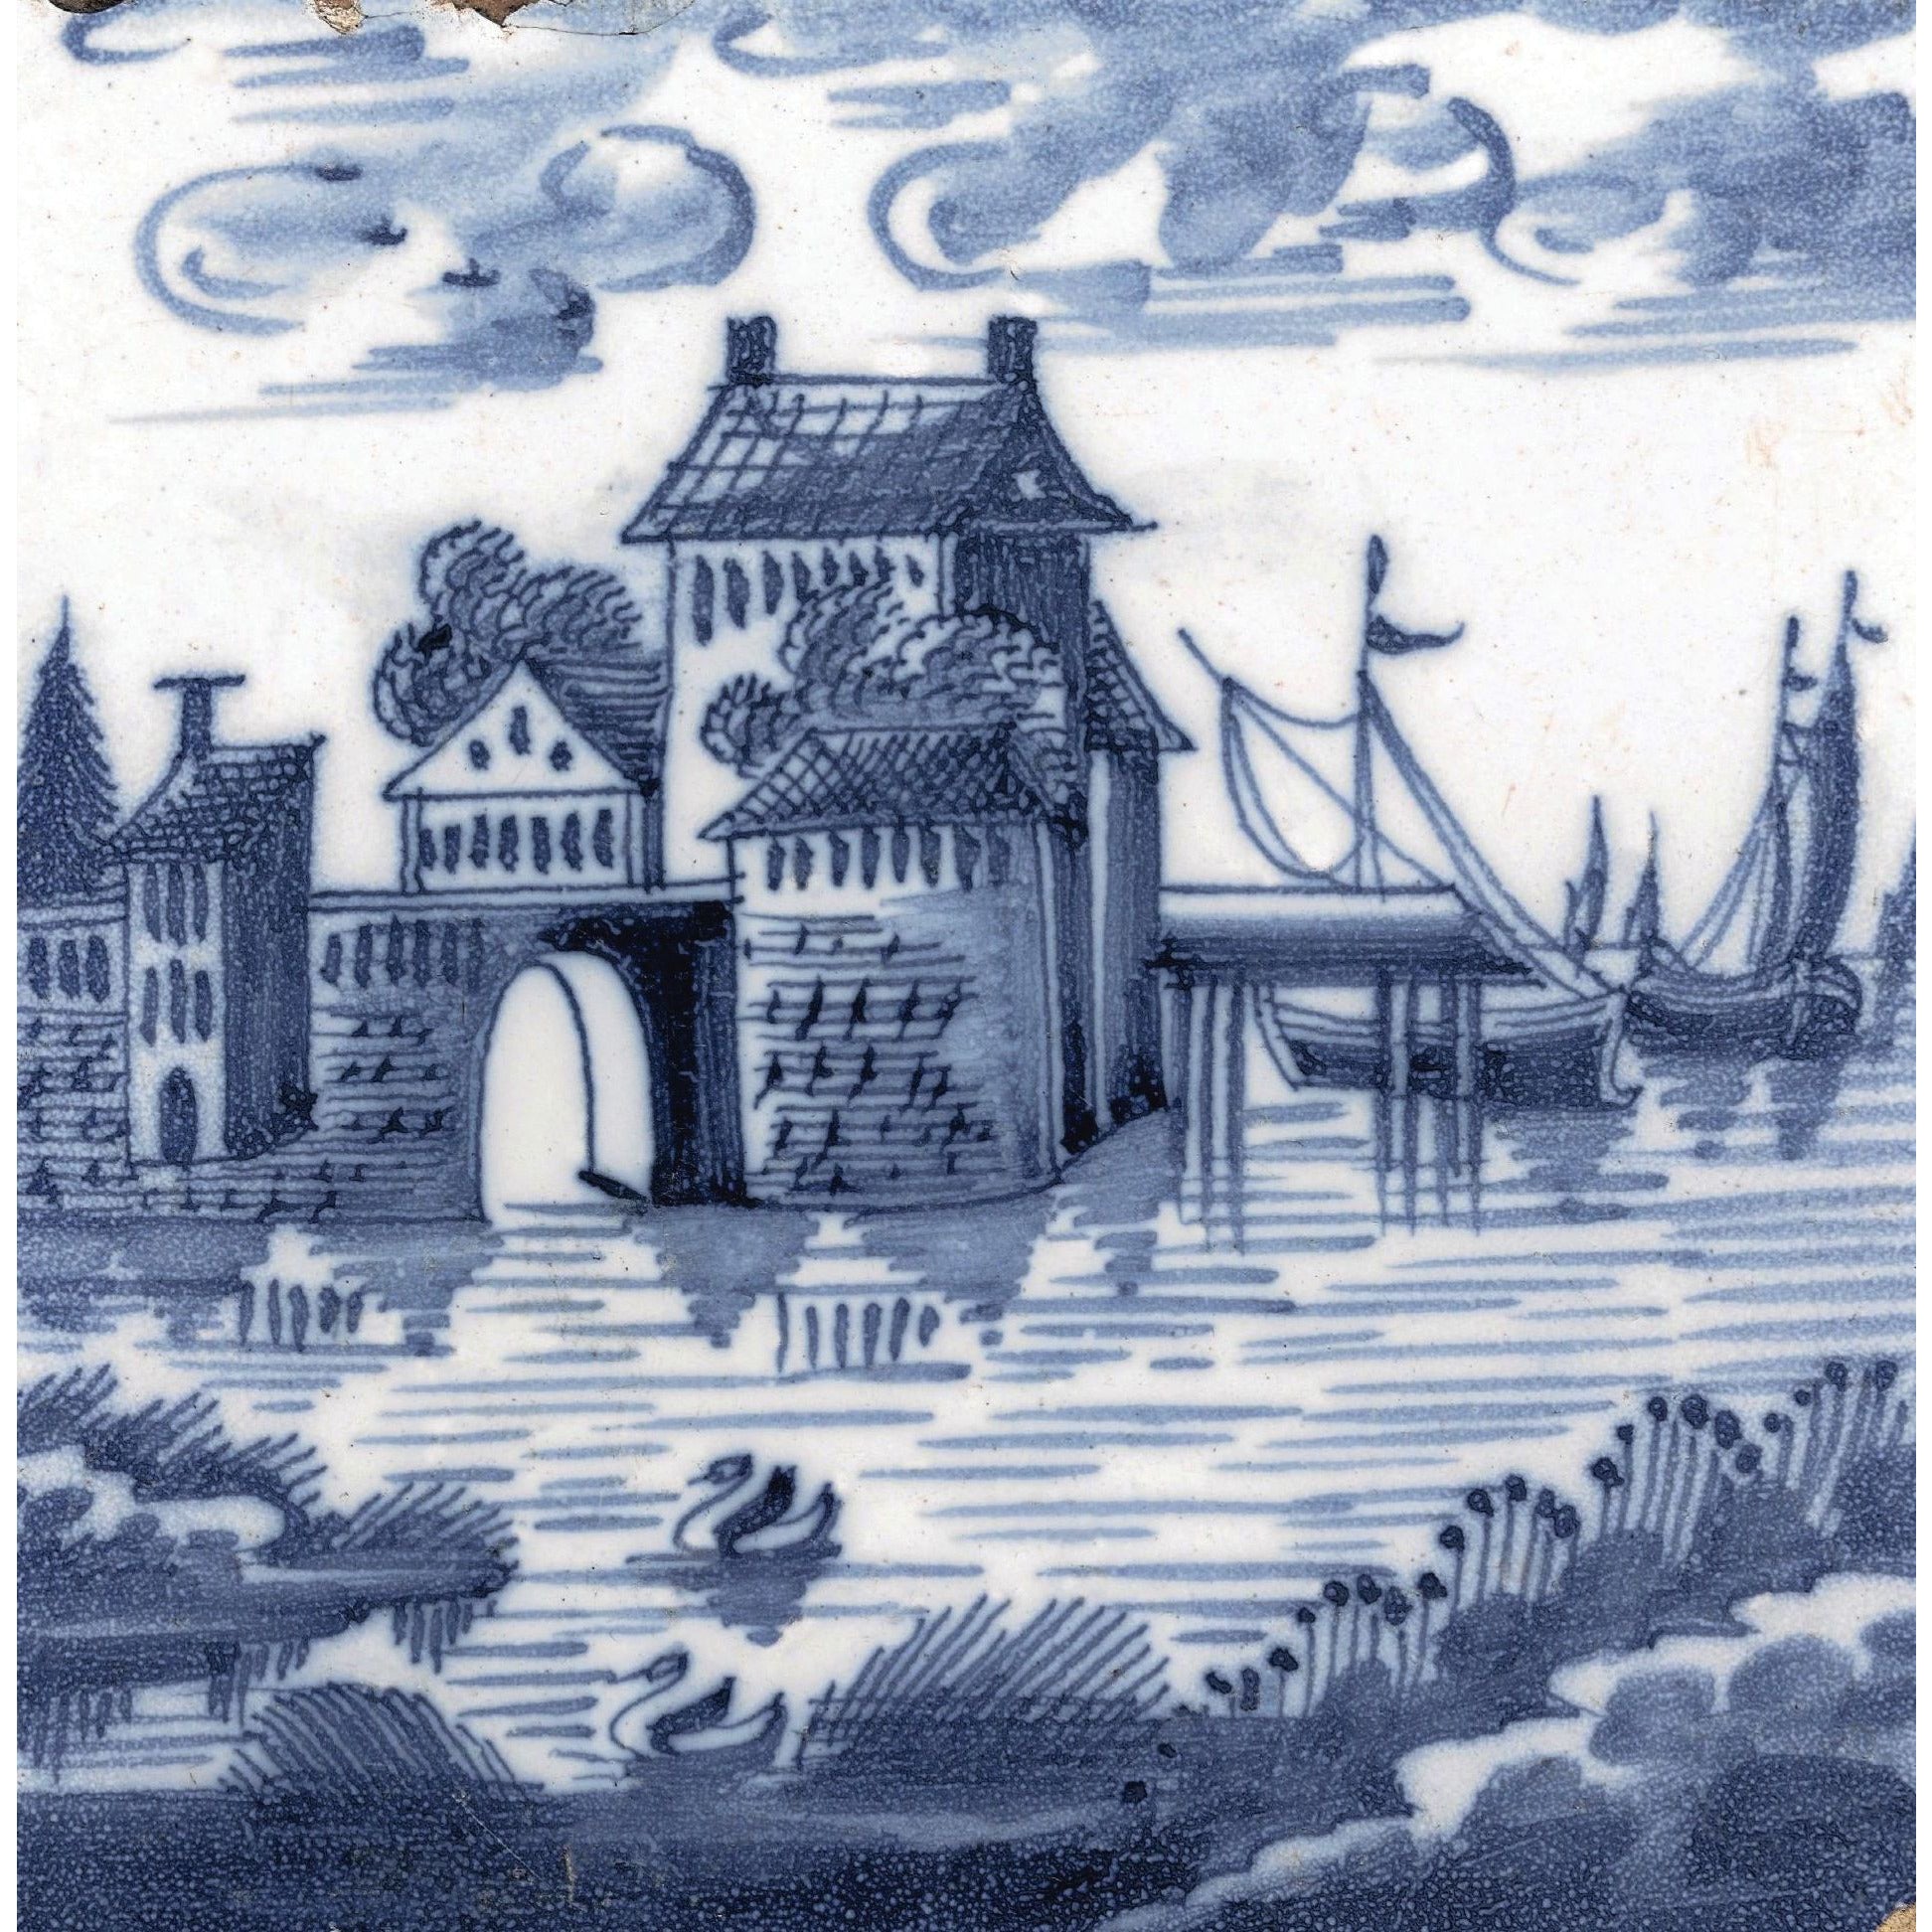 Square greeting card - blue and white tile with a river scene: houses, a bridge, and boats, with rushes and swans in the foreground. Dutch. From the collection of The Fitzwilliam Museum, brought to you by CuratingCambridge.com